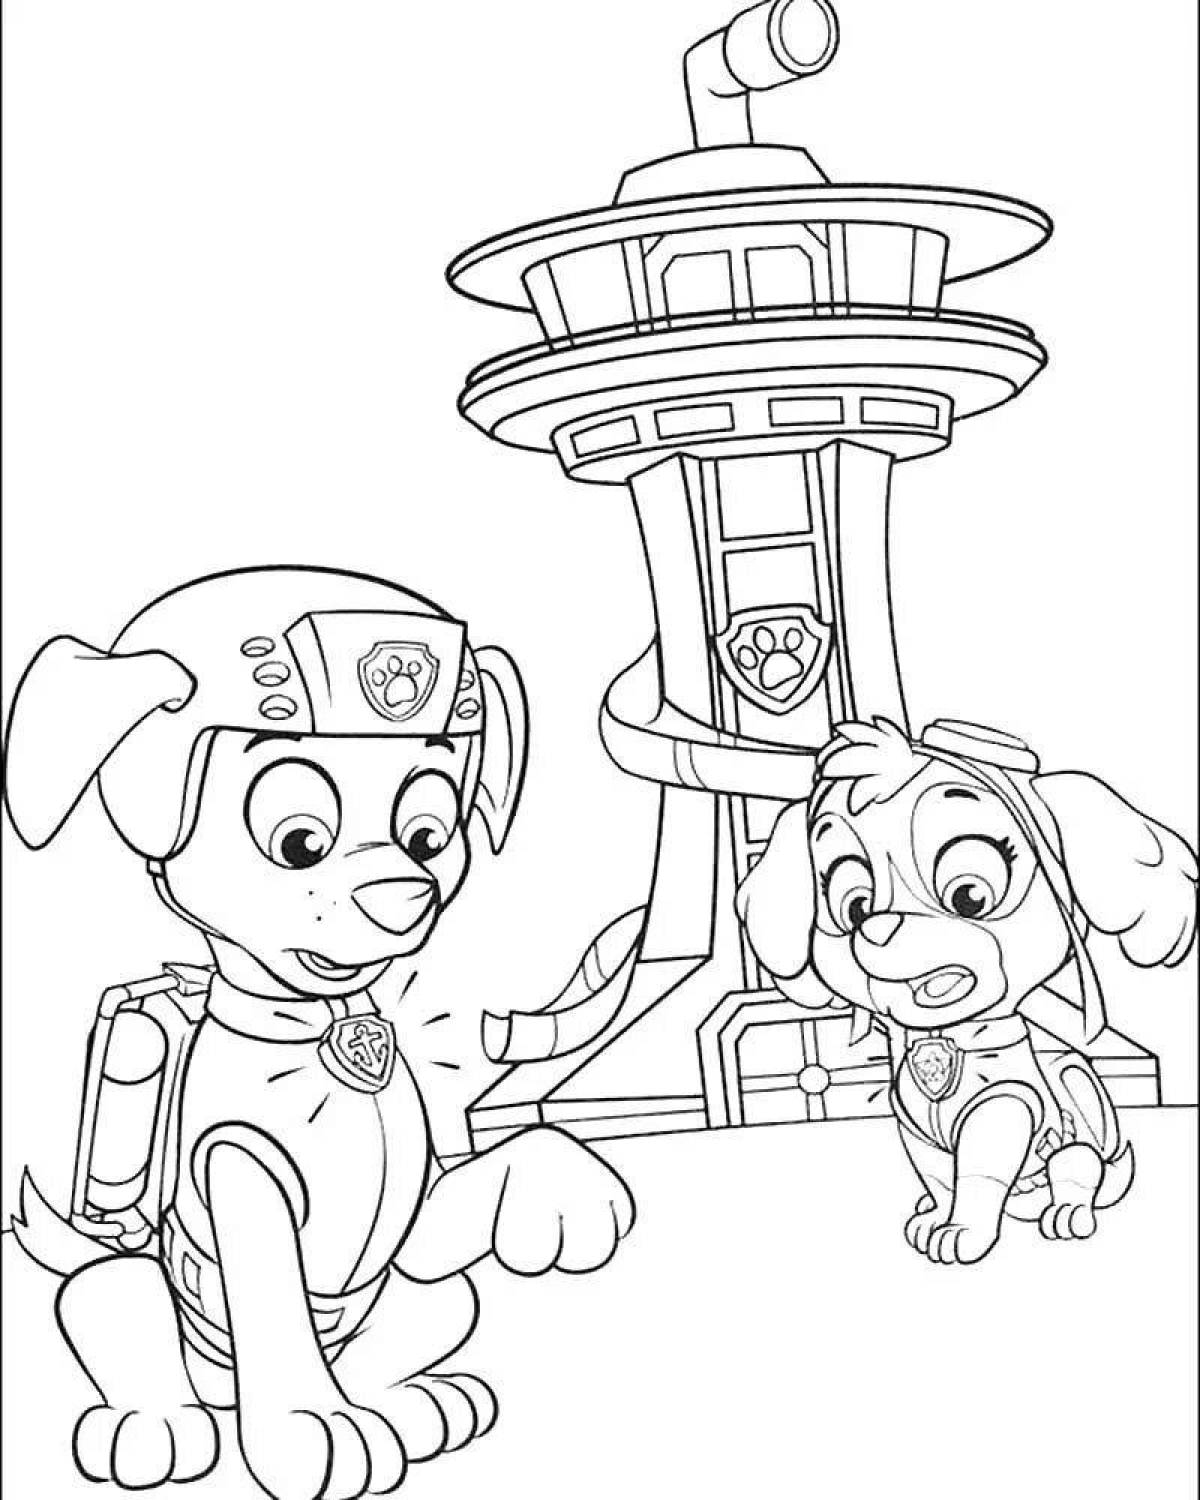 Coloring page funny paw patrol